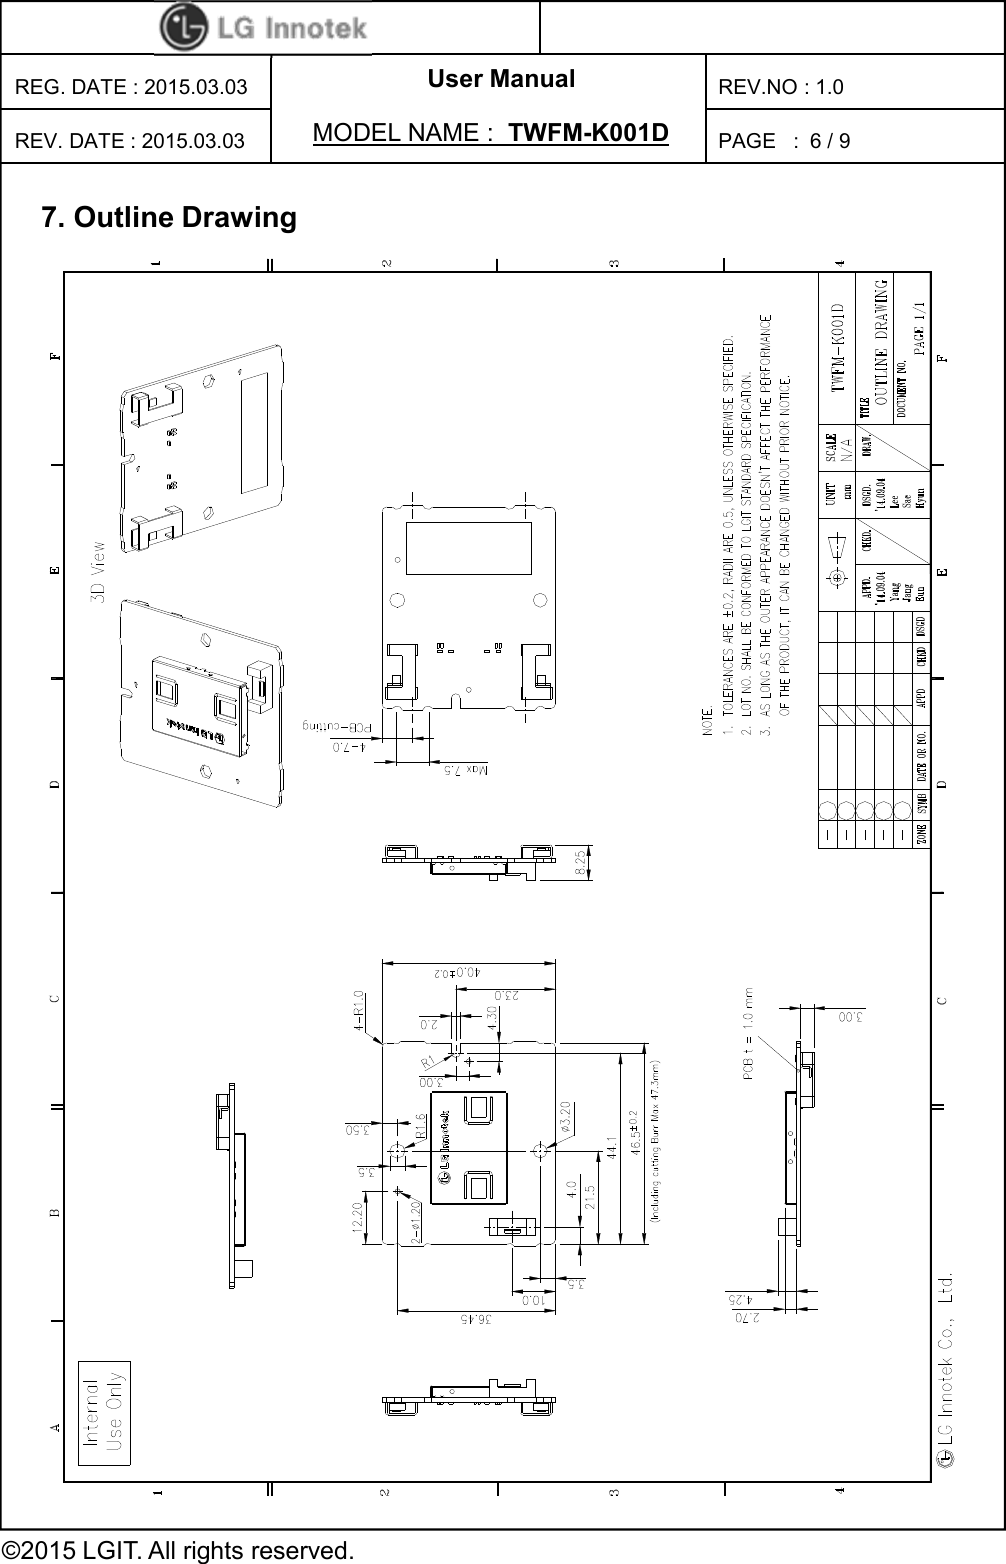 User Manual PAGE   : REG. DATE : 2015.03.03 MODEL NAME :  TWFM-K001D  REV. DATE : 2015.03.03 REV.NO : 1.0 ©2015 LGIT. All rights reserved. 6 / 9 7. Outline Drawing  